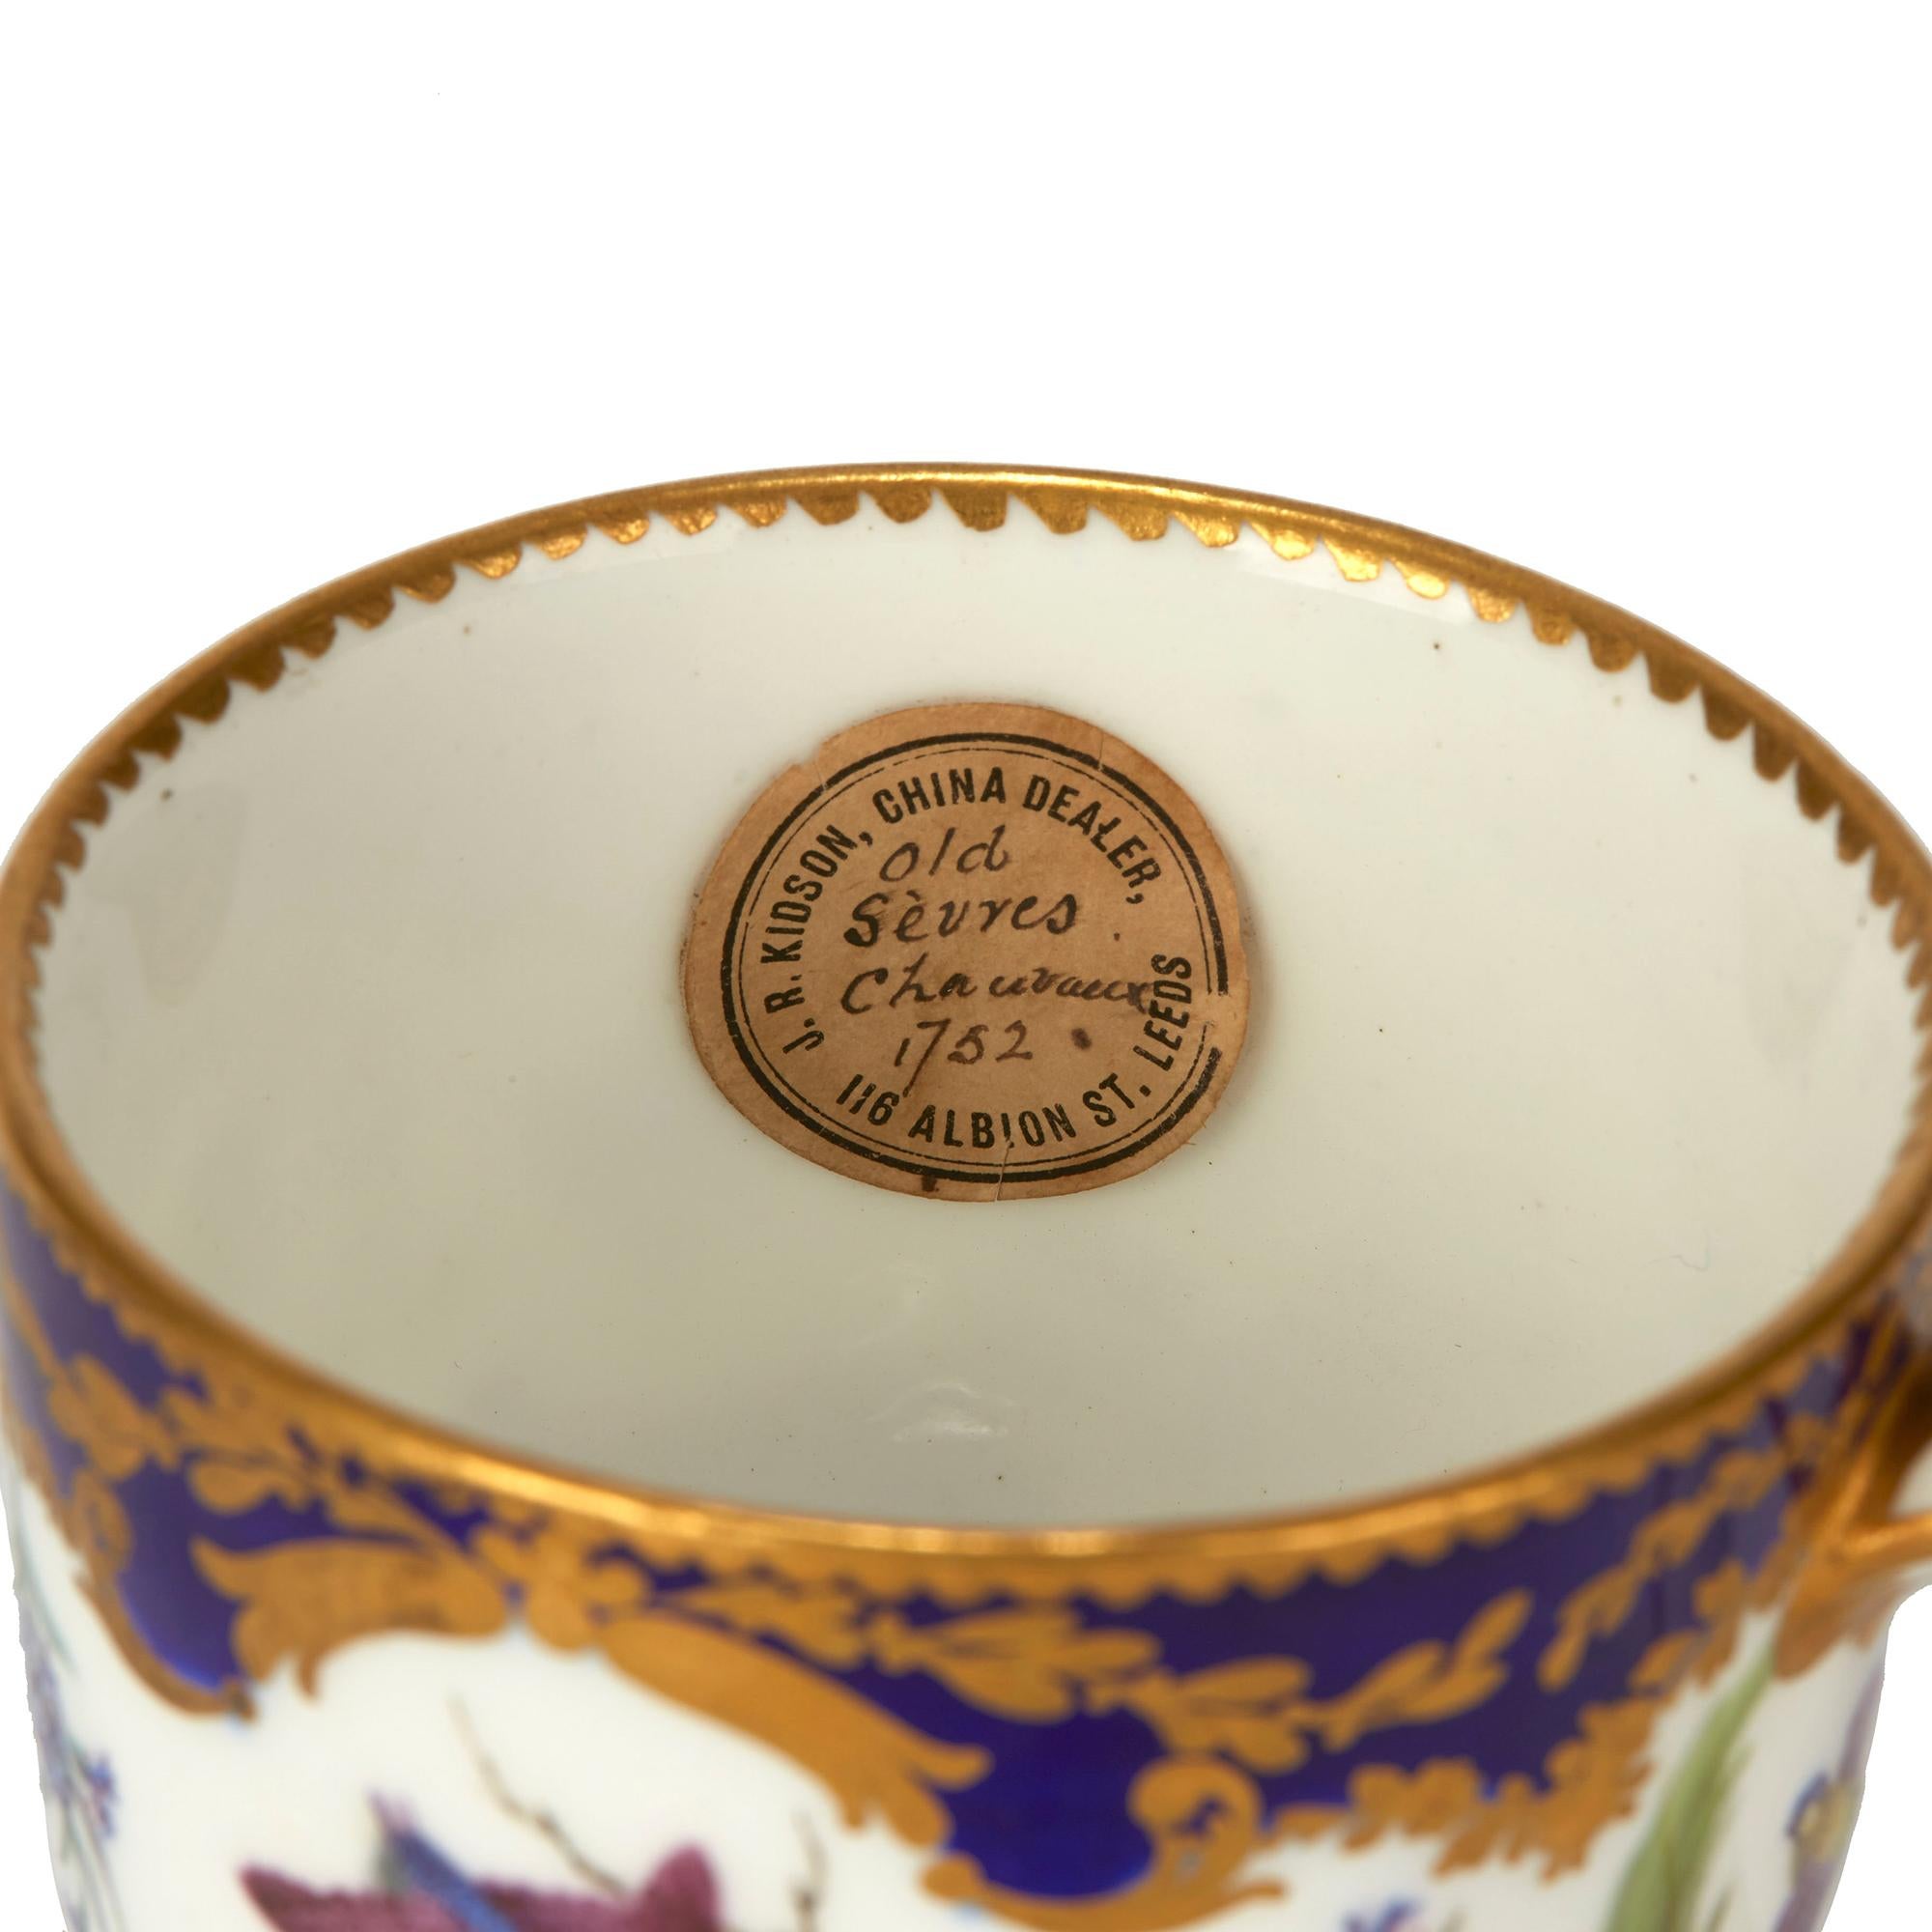 A rare and exceptional antique Sèvres soft paste porcelain cabinet teacup hand painted with birds landscapes interspersed with floral designs on a white ground within cobalt blue borders finely gilded with scroll and leaf designs dating from circa